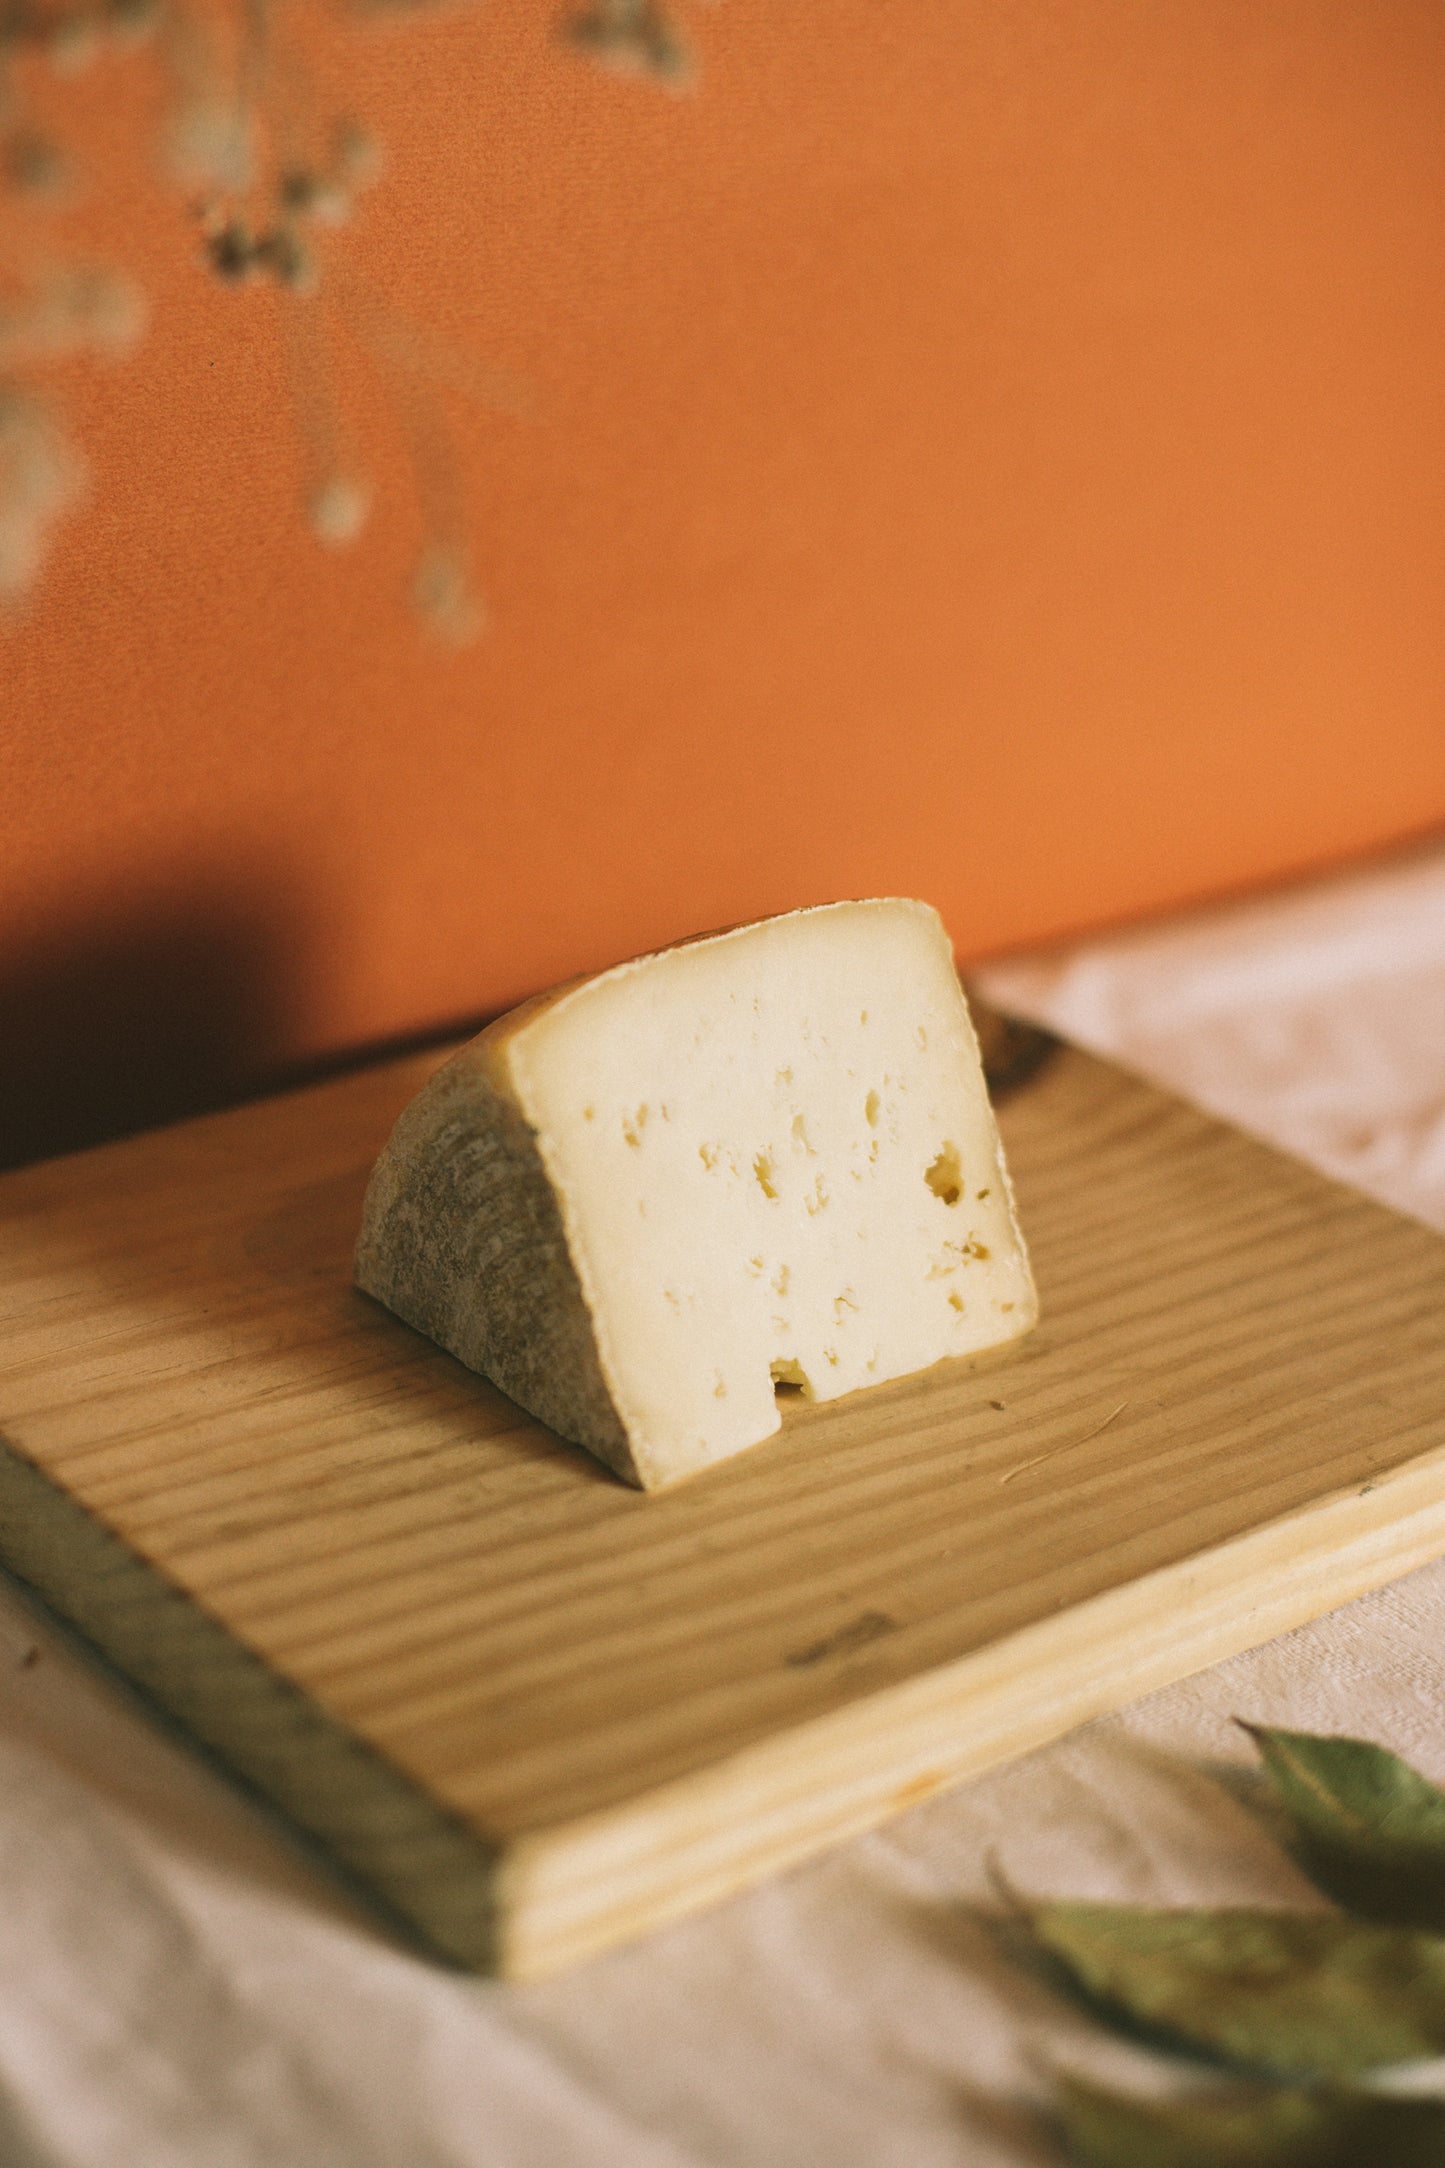 Semicured cow cheese from Granja Maravillas